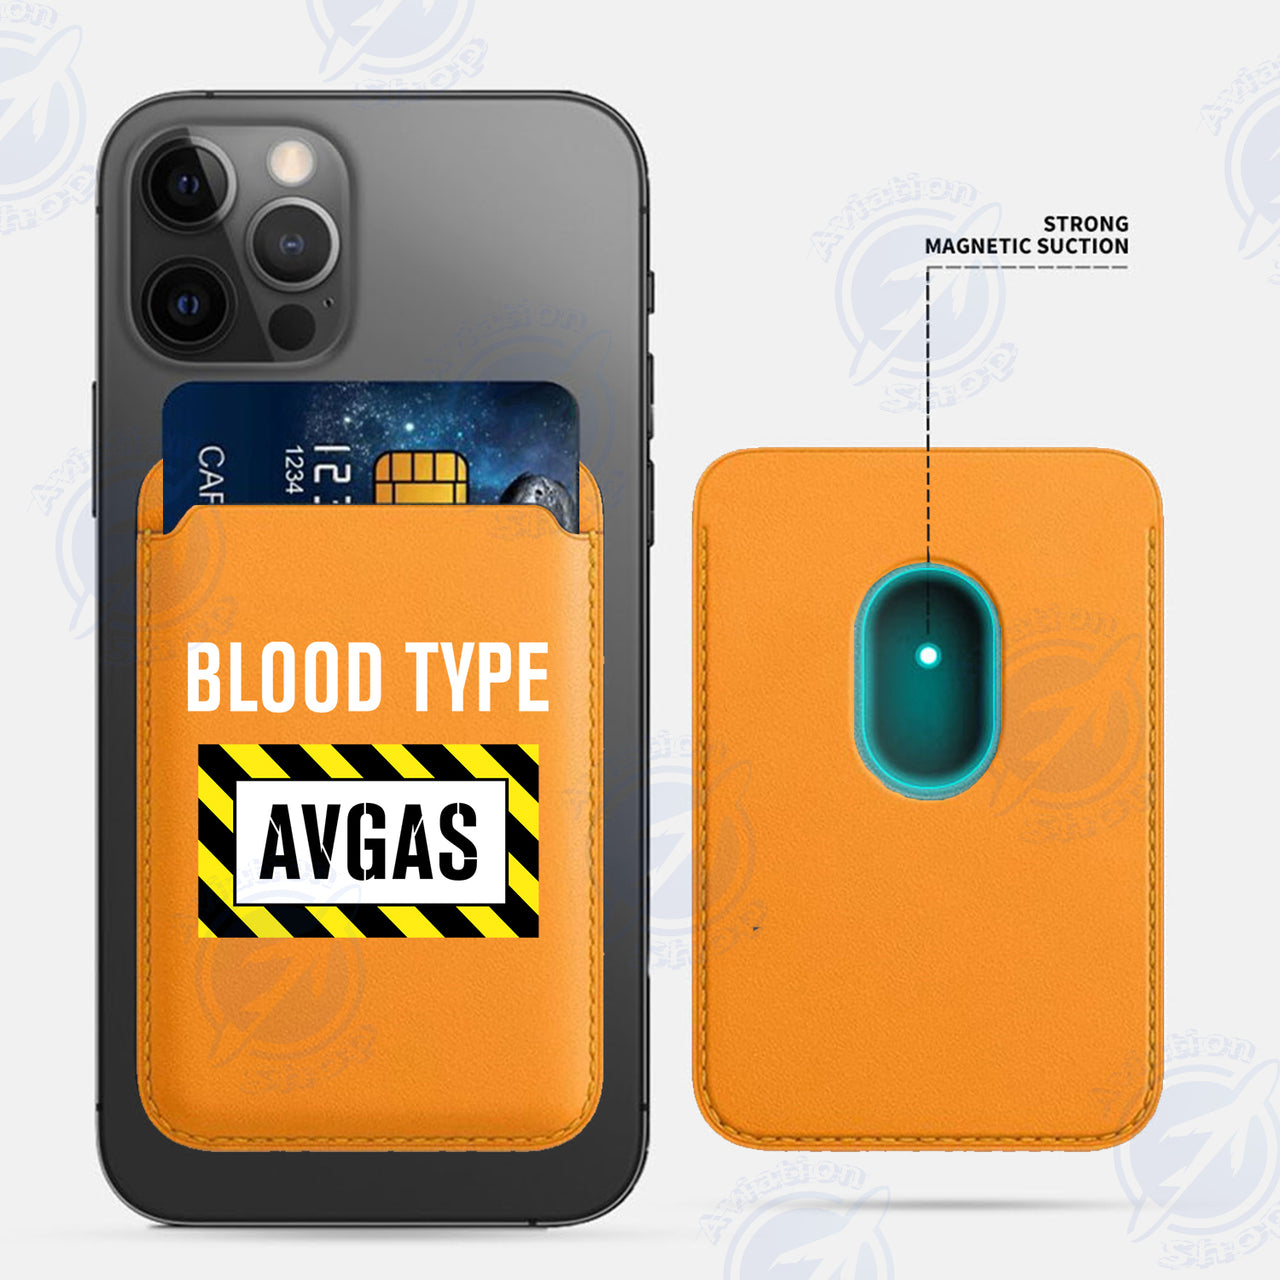 Blood Type AVGAS iPhone Cases Magnetic Card Wallet